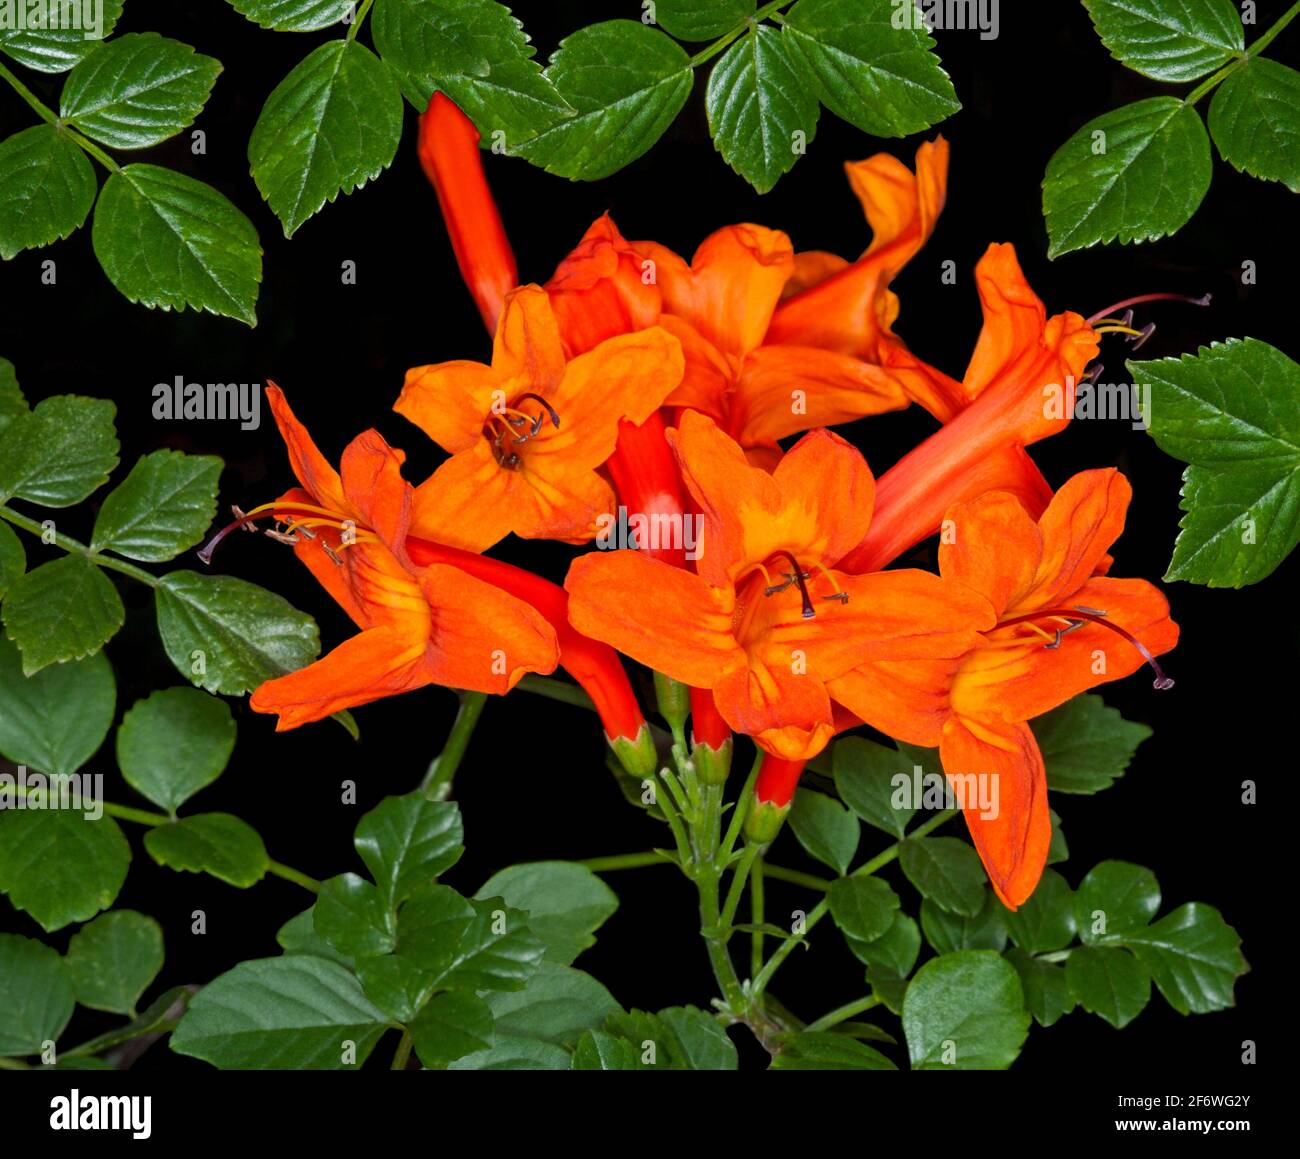 Stunning image of cluster of vivid orange / red flowers & emerald green leaves of Tecoma capensis, Cape Honeysuckle, garden shrub, on black background Stock Photo